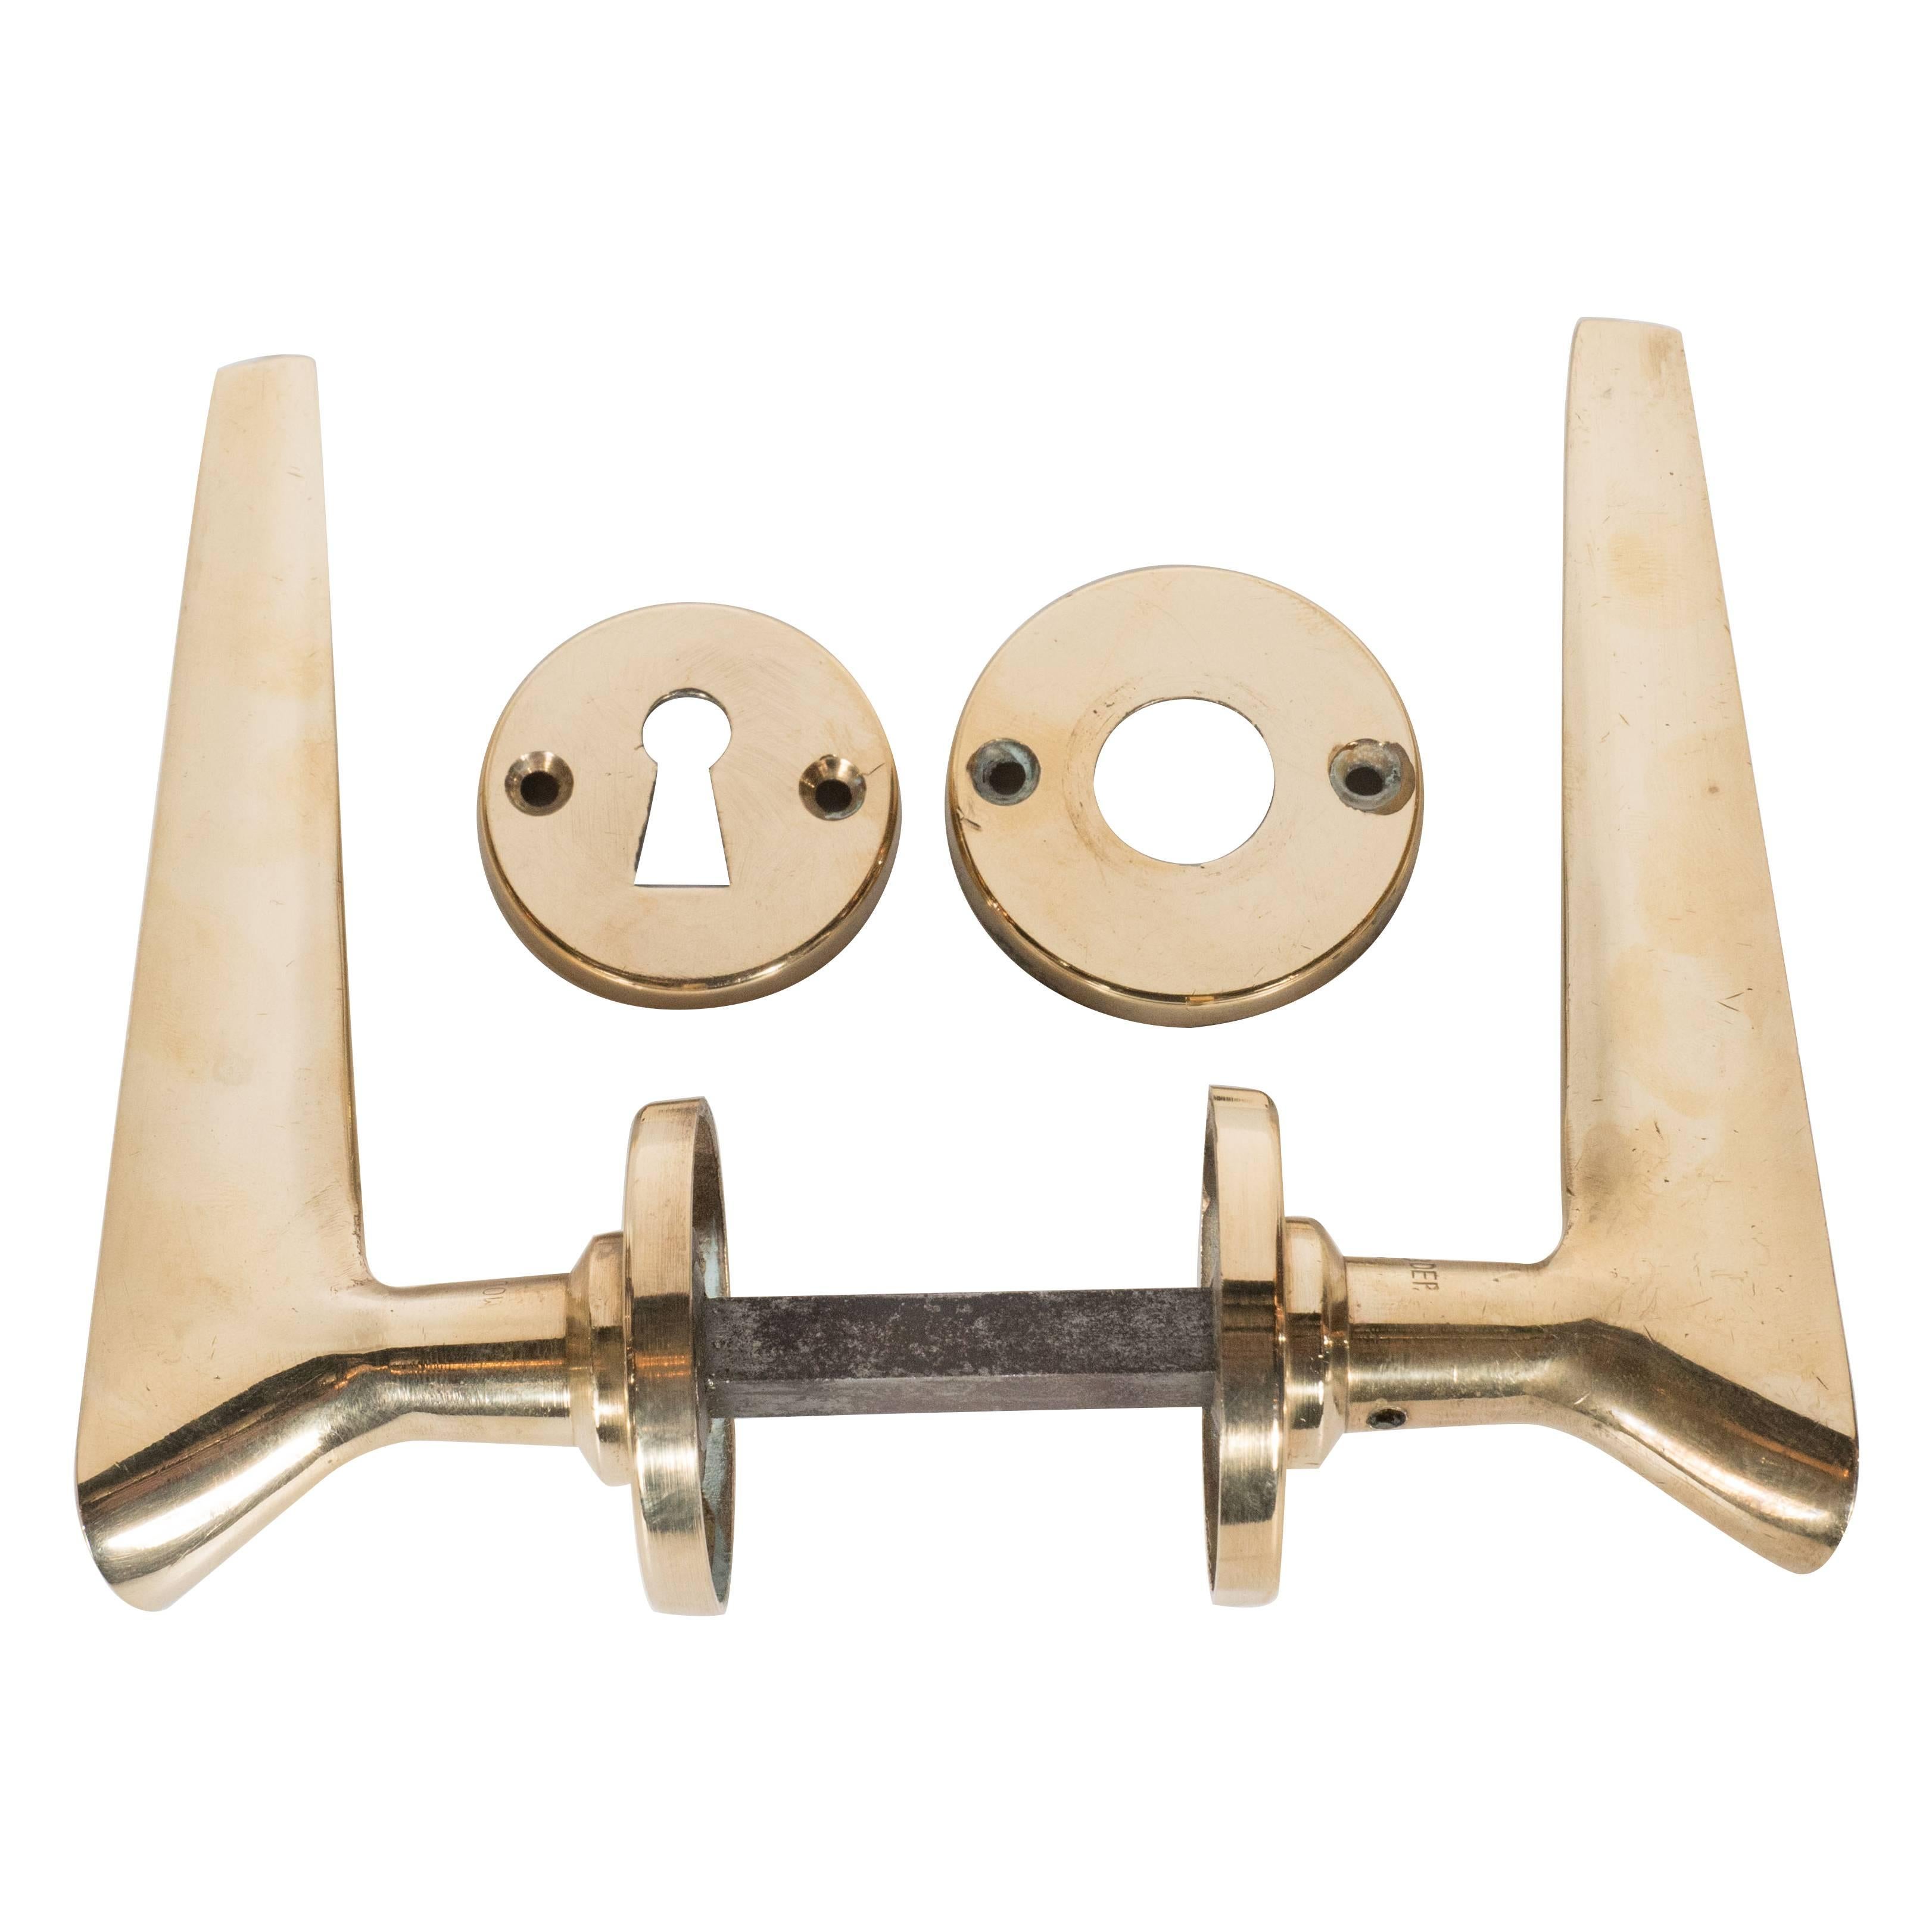 Sourced from a midcentury hotel in San MarCo, Venice, this stunning set of brass door handles were hand produced, in the manner of Gio Ponti, in Italy, circa 1950. They offer the sophisticated modern forms and clean lines that enthusiasts of